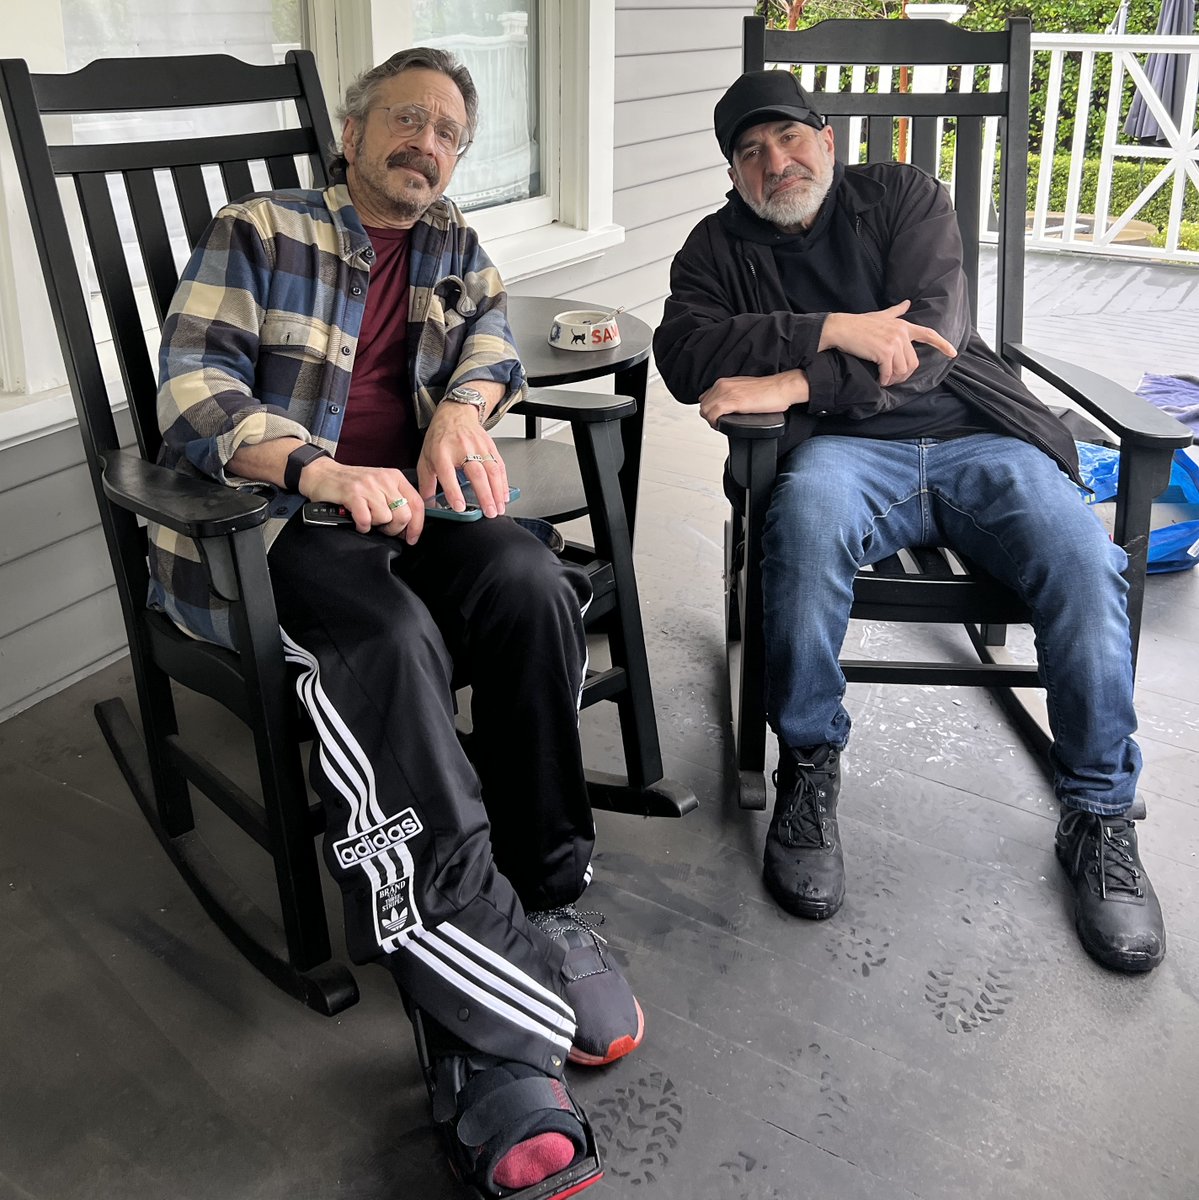 Today is @attell day on wtfpod.com! Hot Cross Buns, comedy booms and busts, doing the road, elderly parents. Great talk. Listen up! Episode hosted by @acast - wtfpod.com/podcast/episod… On @ApplePodcasts - podcasts.apple.com/us/podcast/epi…